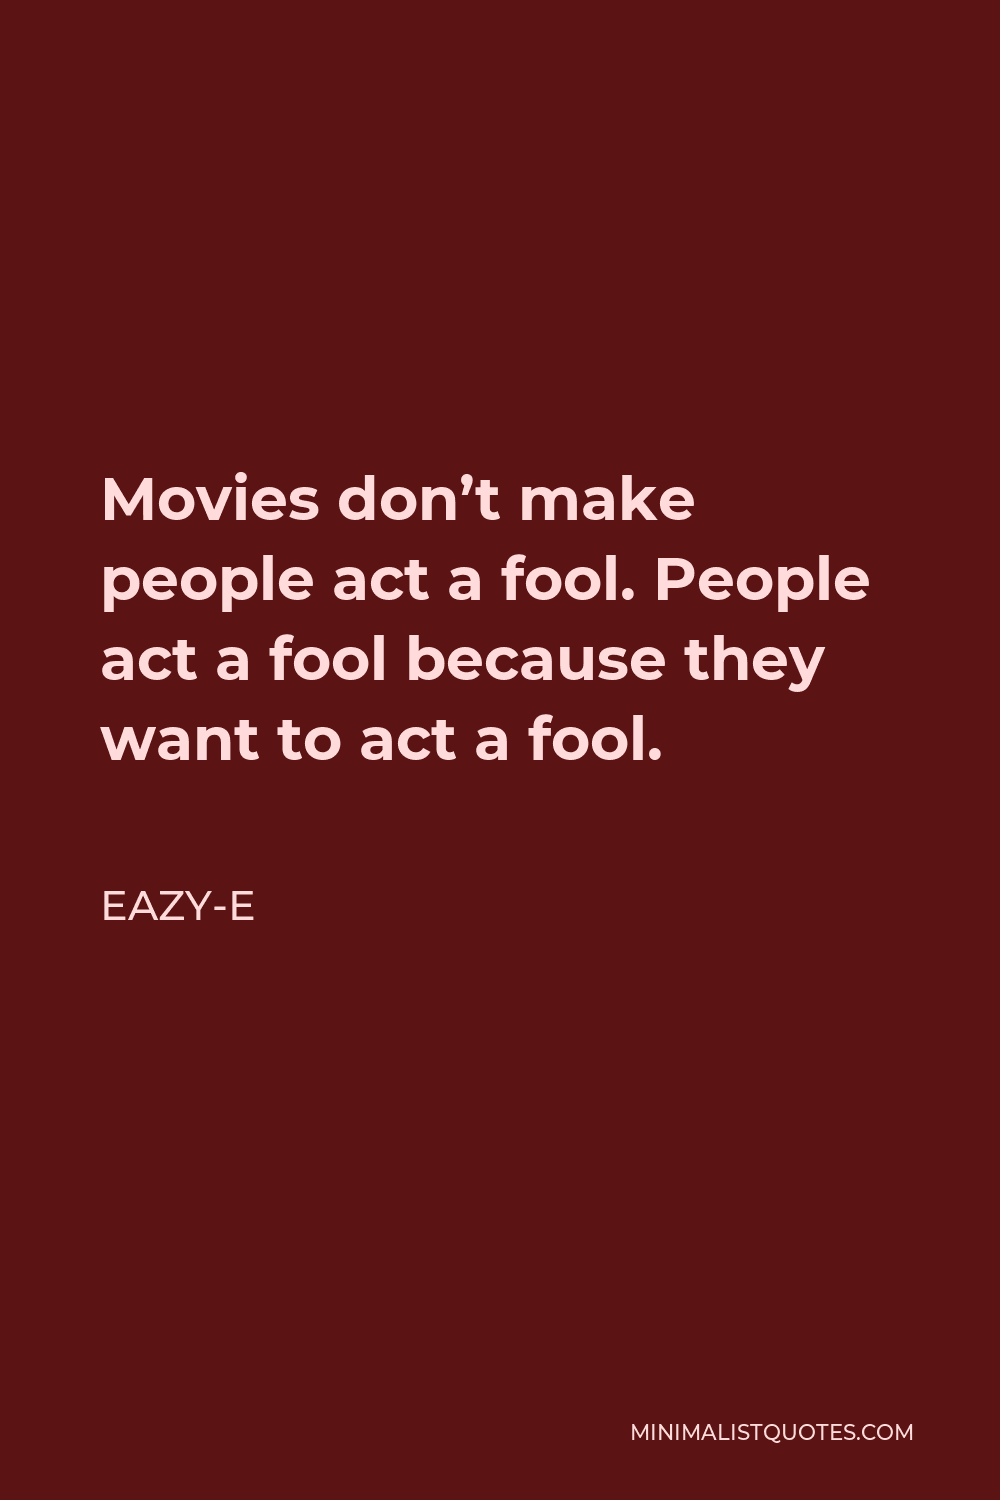 Eazy-E Quote - Movies don’t make people act a fool. People act a fool because they want to act a fool.